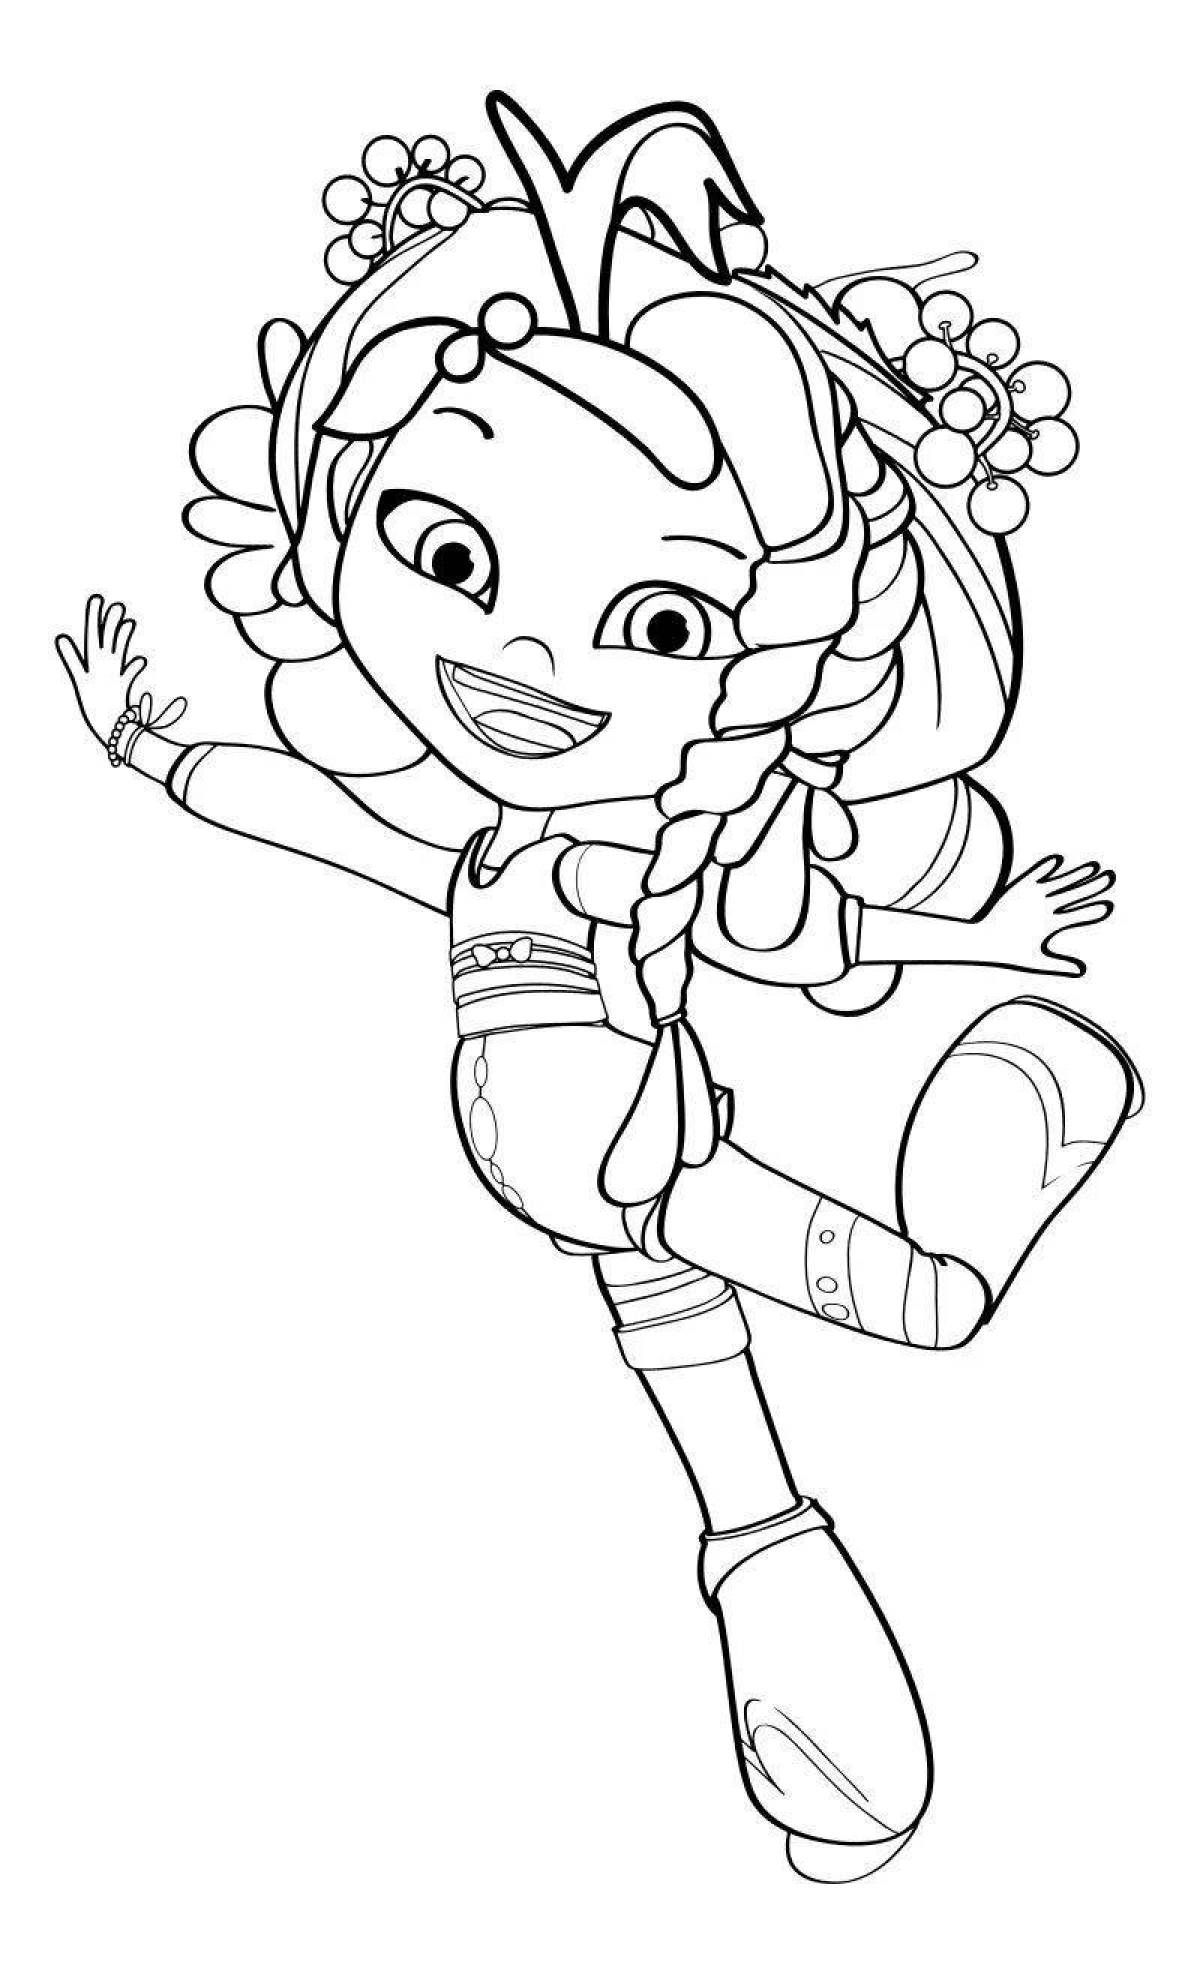 Grand coloring page патруль любава